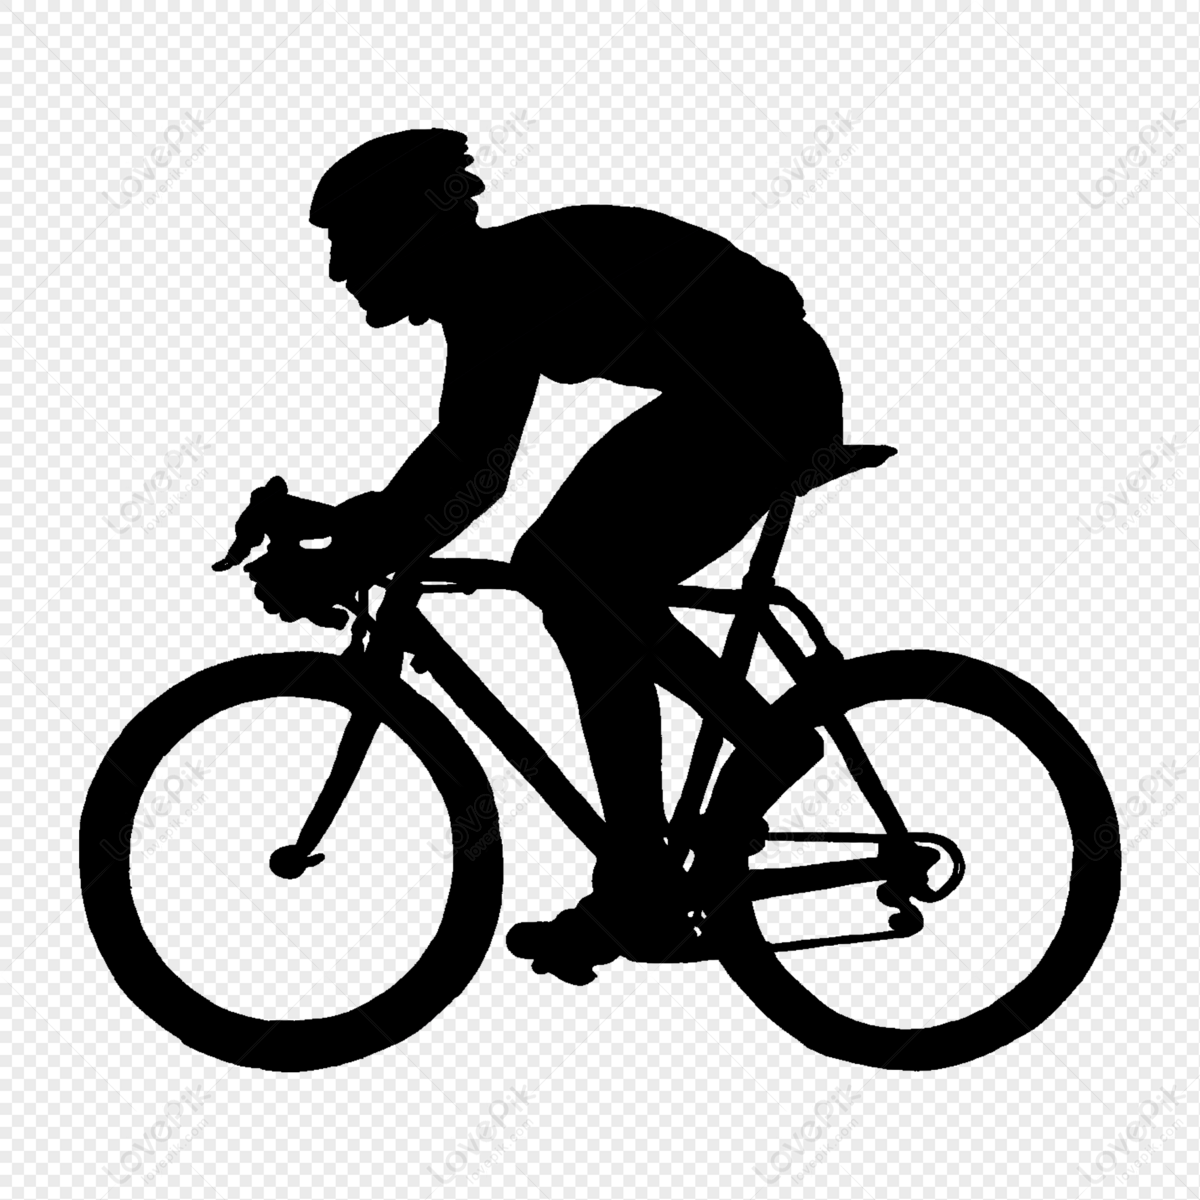 Bike Silhouette PNG Images With Transparent Background | Free Download ...